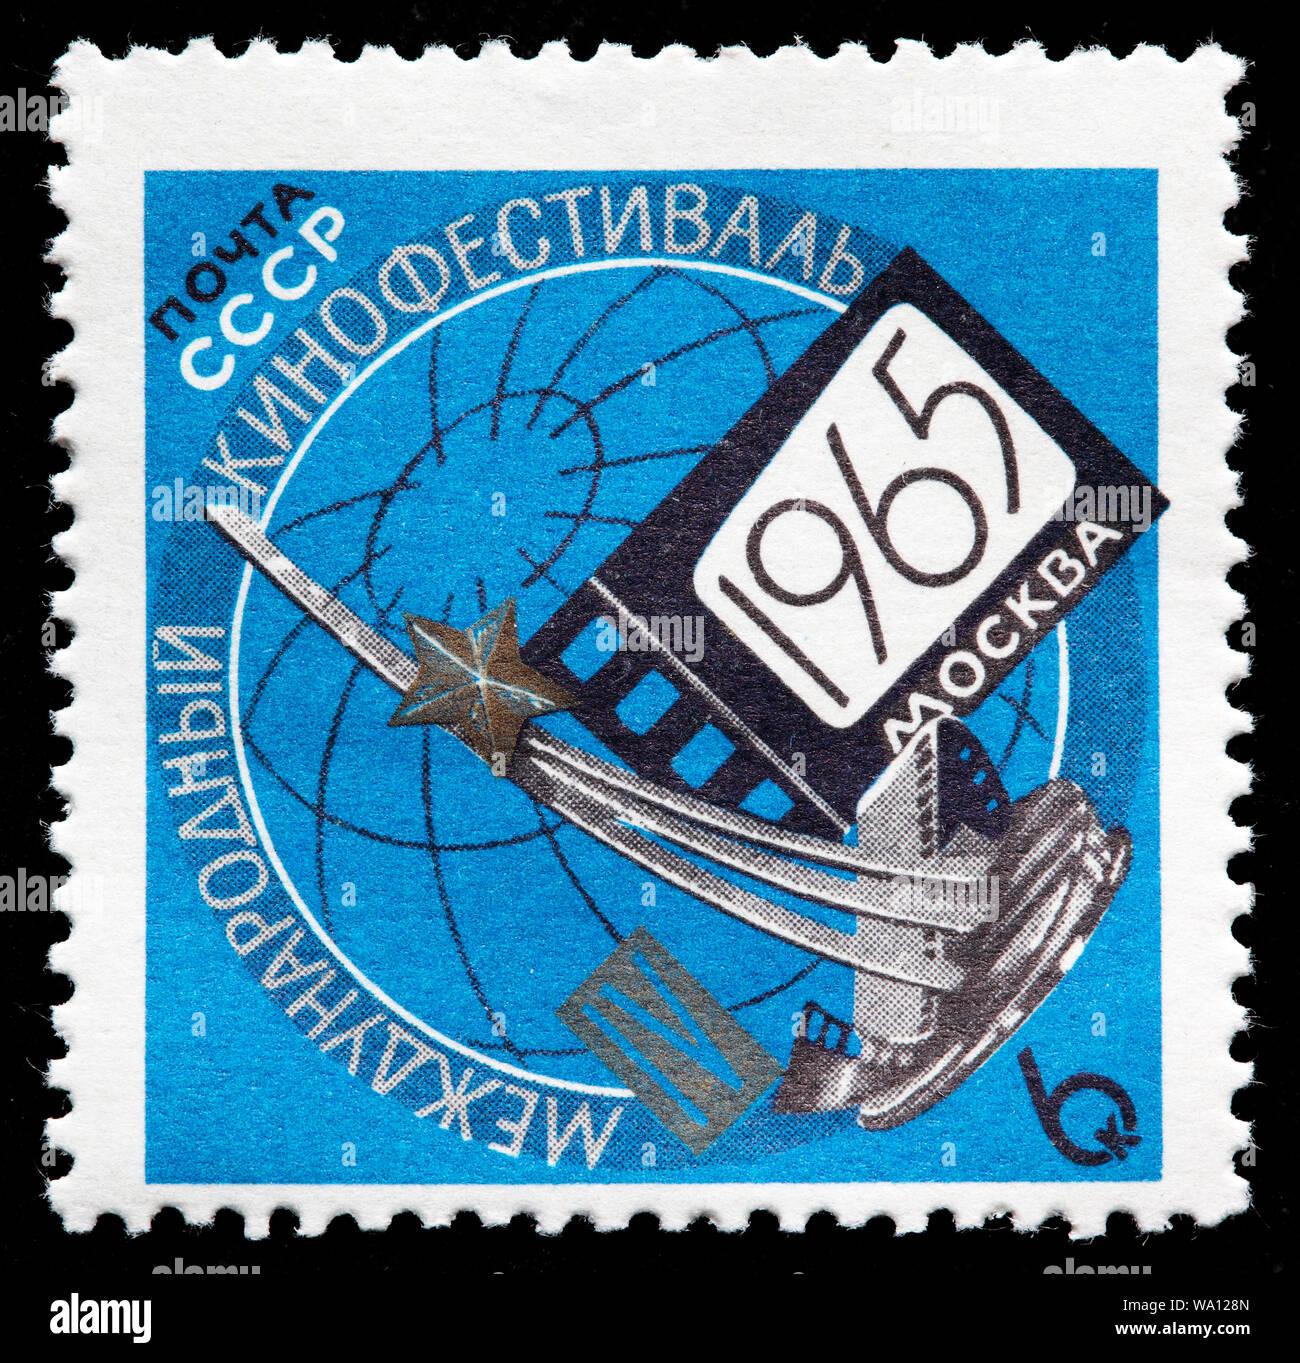 IV International cinema festival, Moscow, postage stamp, Russia, USSR, 1965 Stock Photo